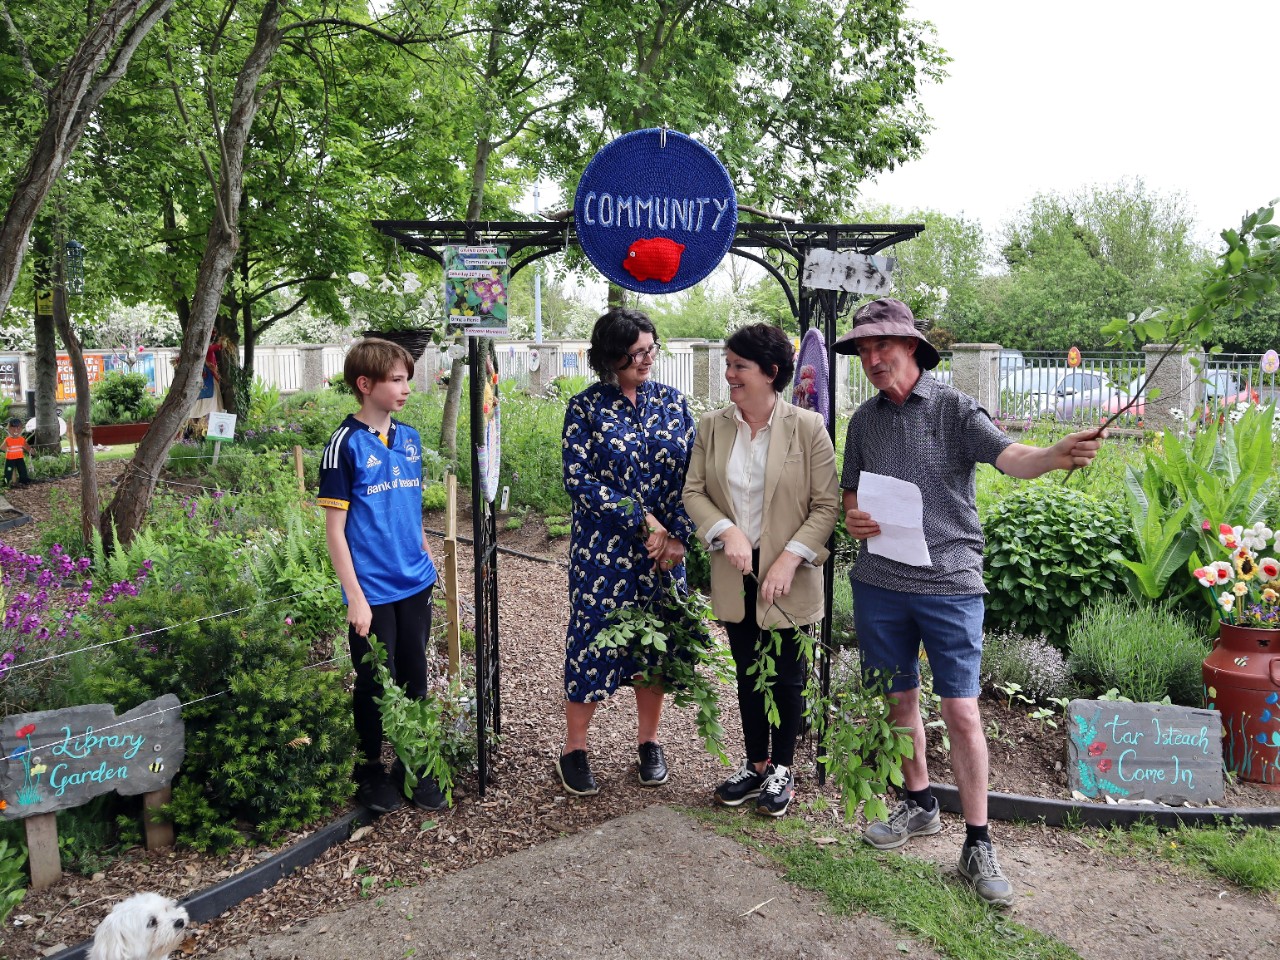 Group of people standing in a garden, in front of an arched sign that reads ‘Community’